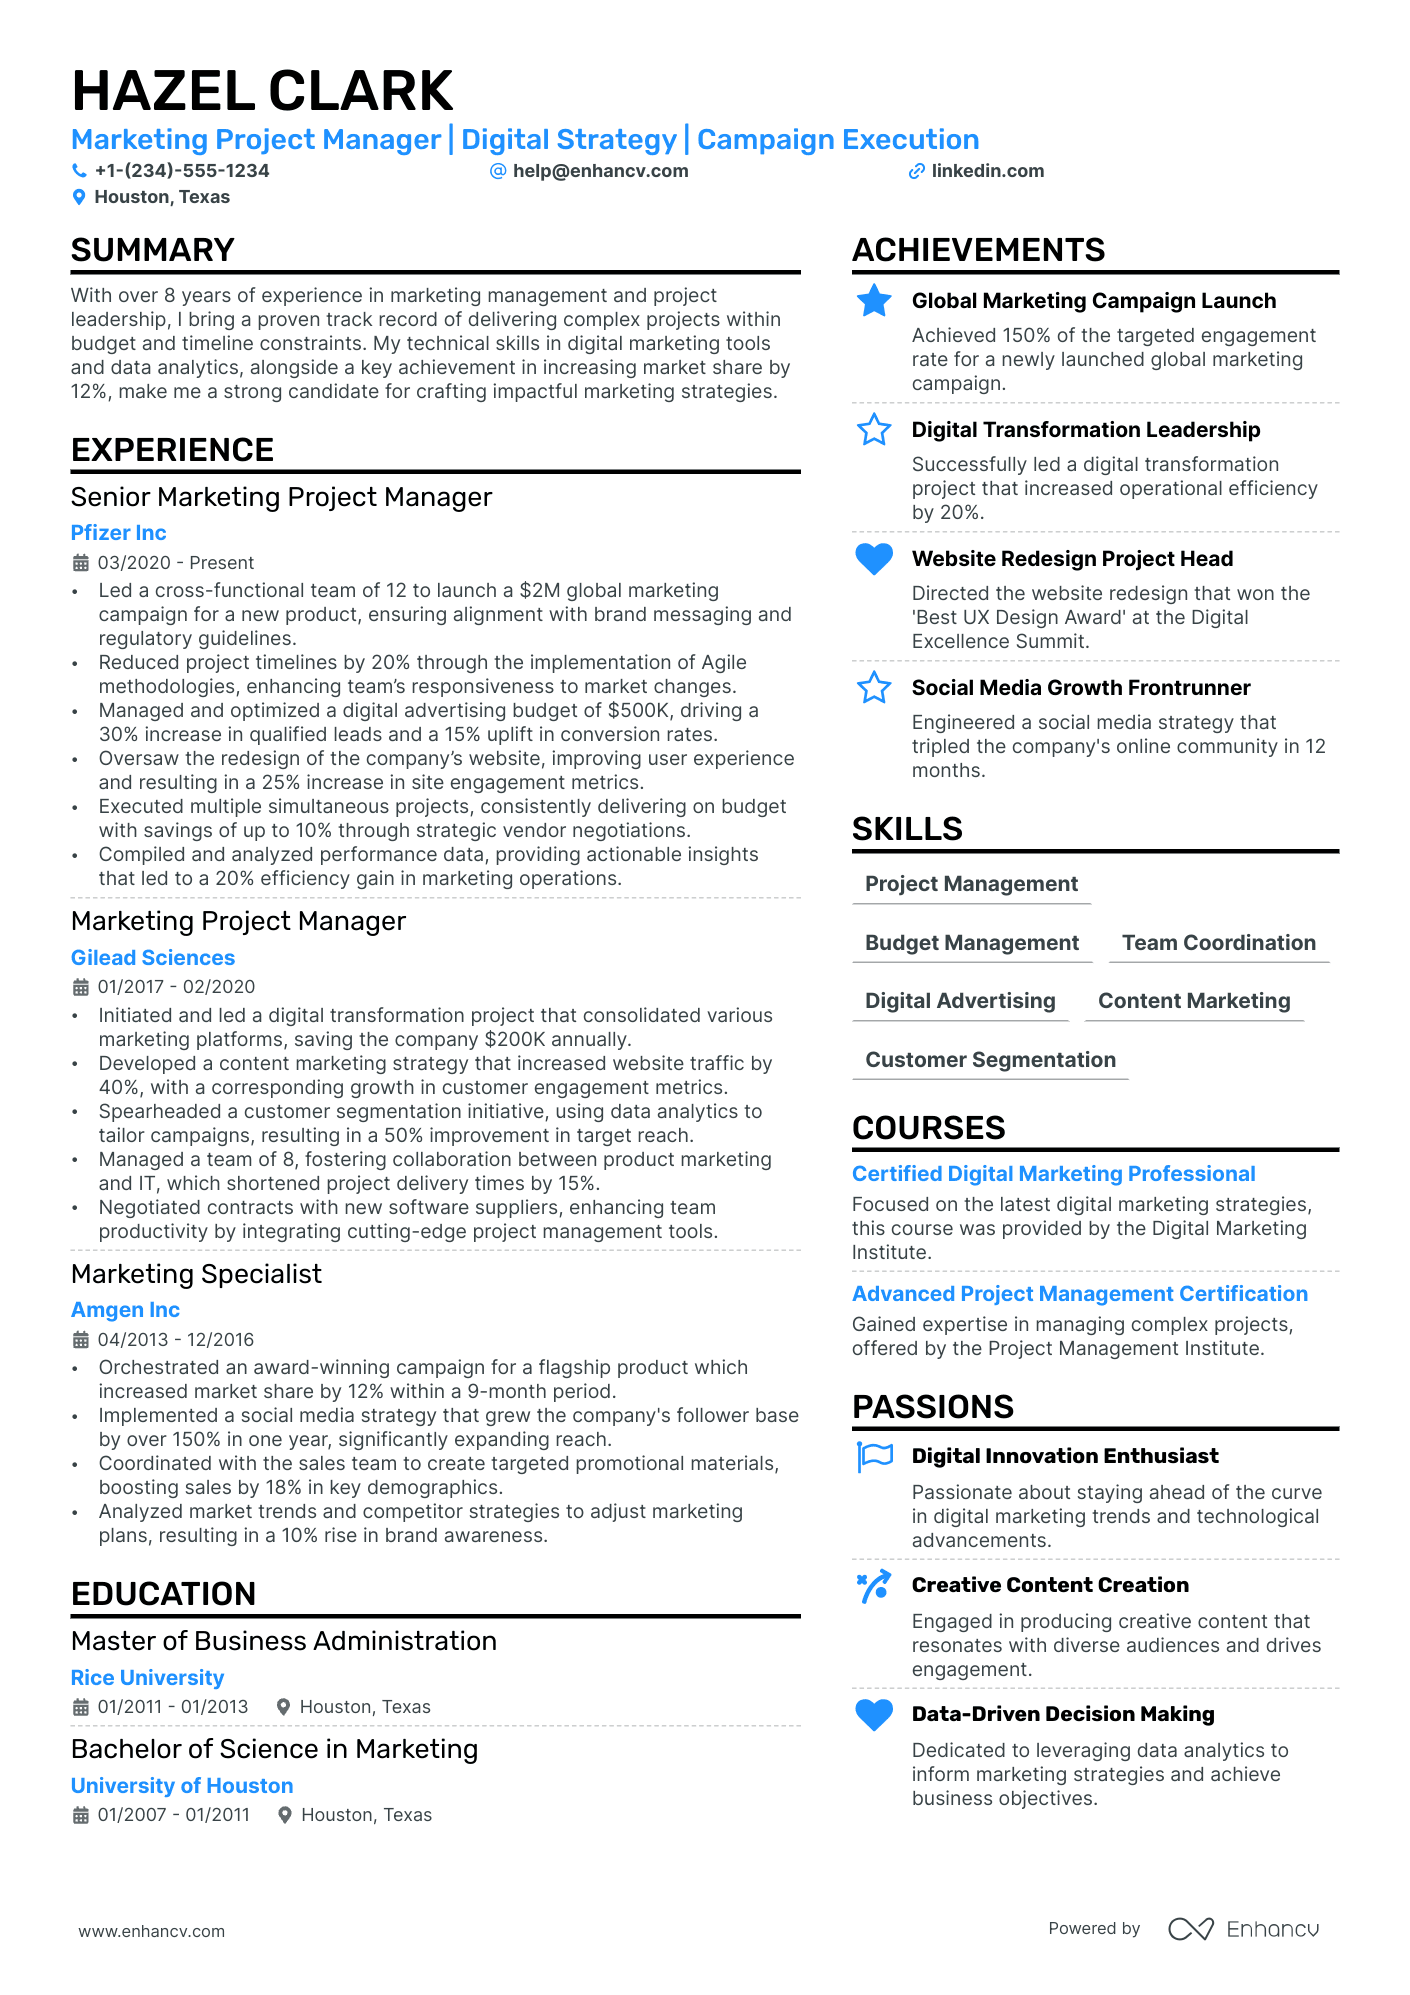 Marketing Project Manager resume example